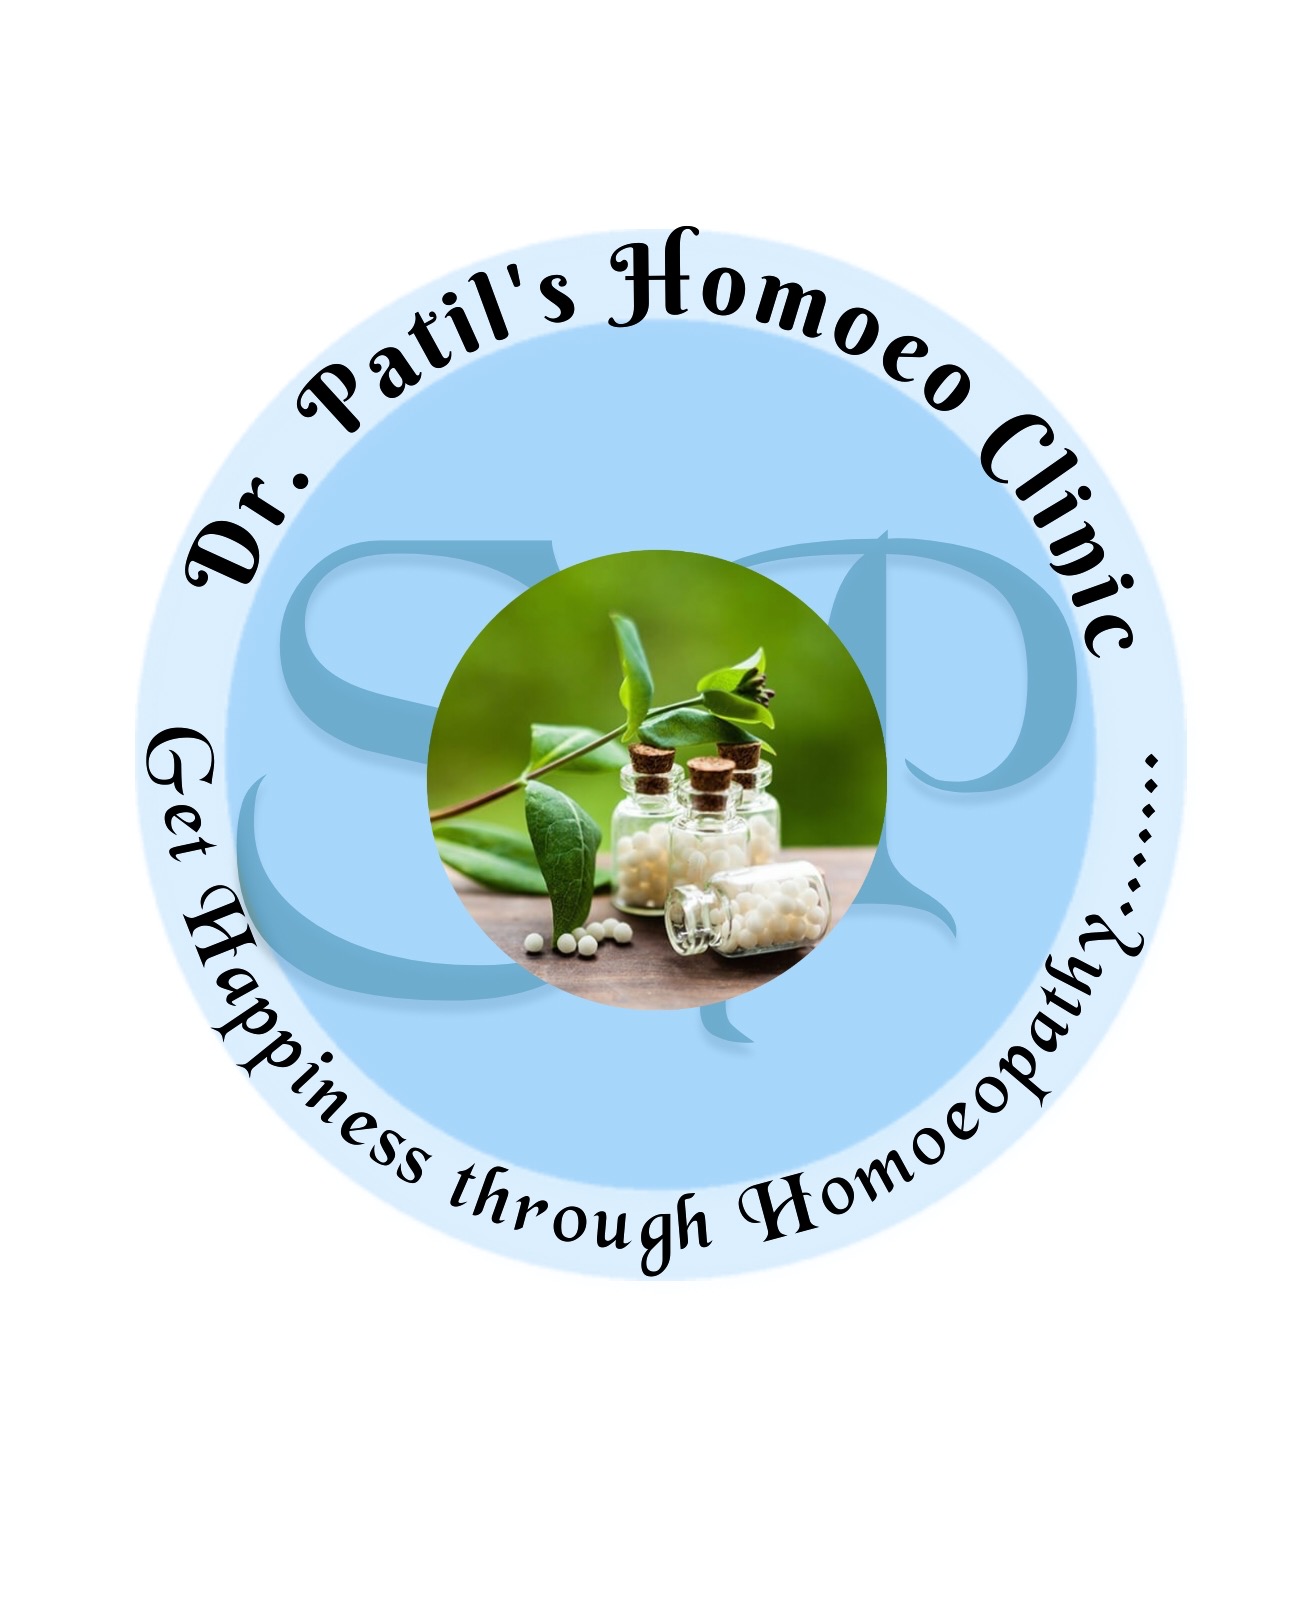 Dr.Patil's Homoeo Clinic